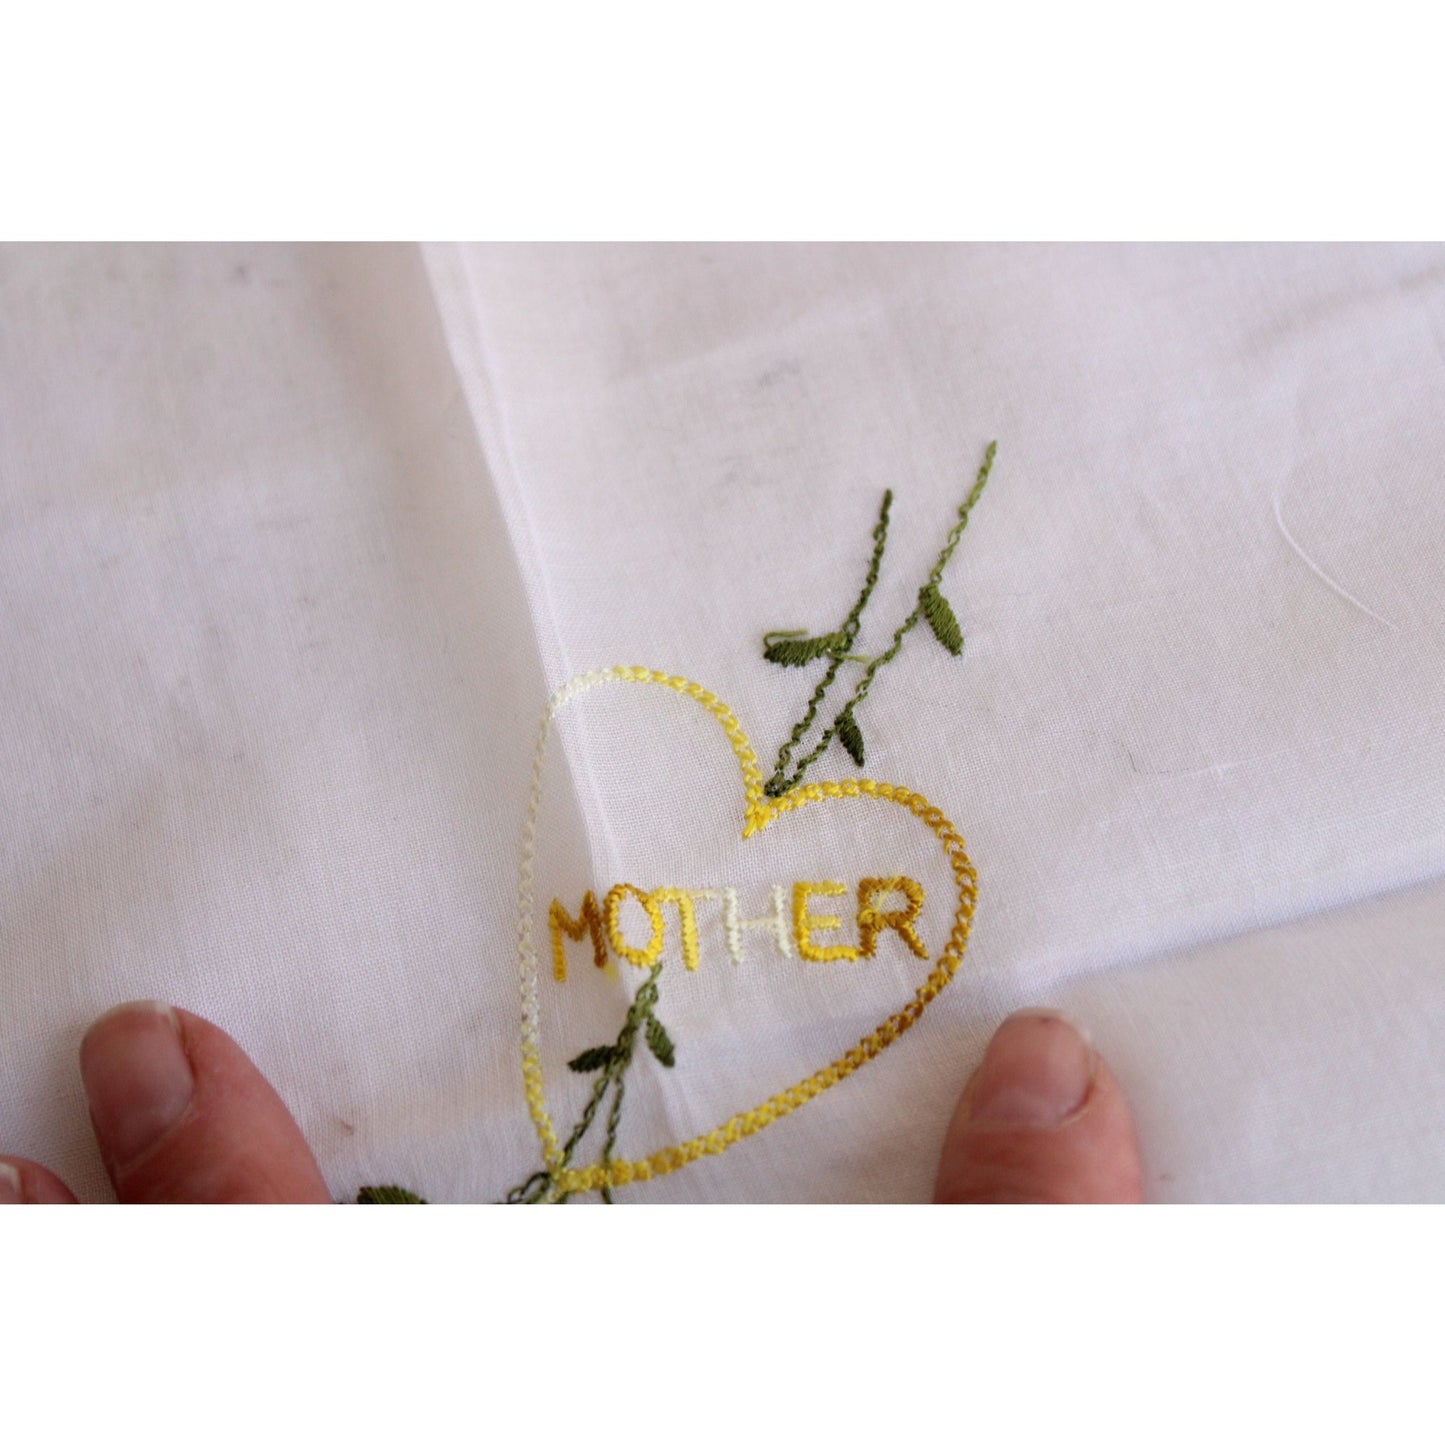 Vintage Handkerchief, Embroidered with "Mother" and Yellow Roses